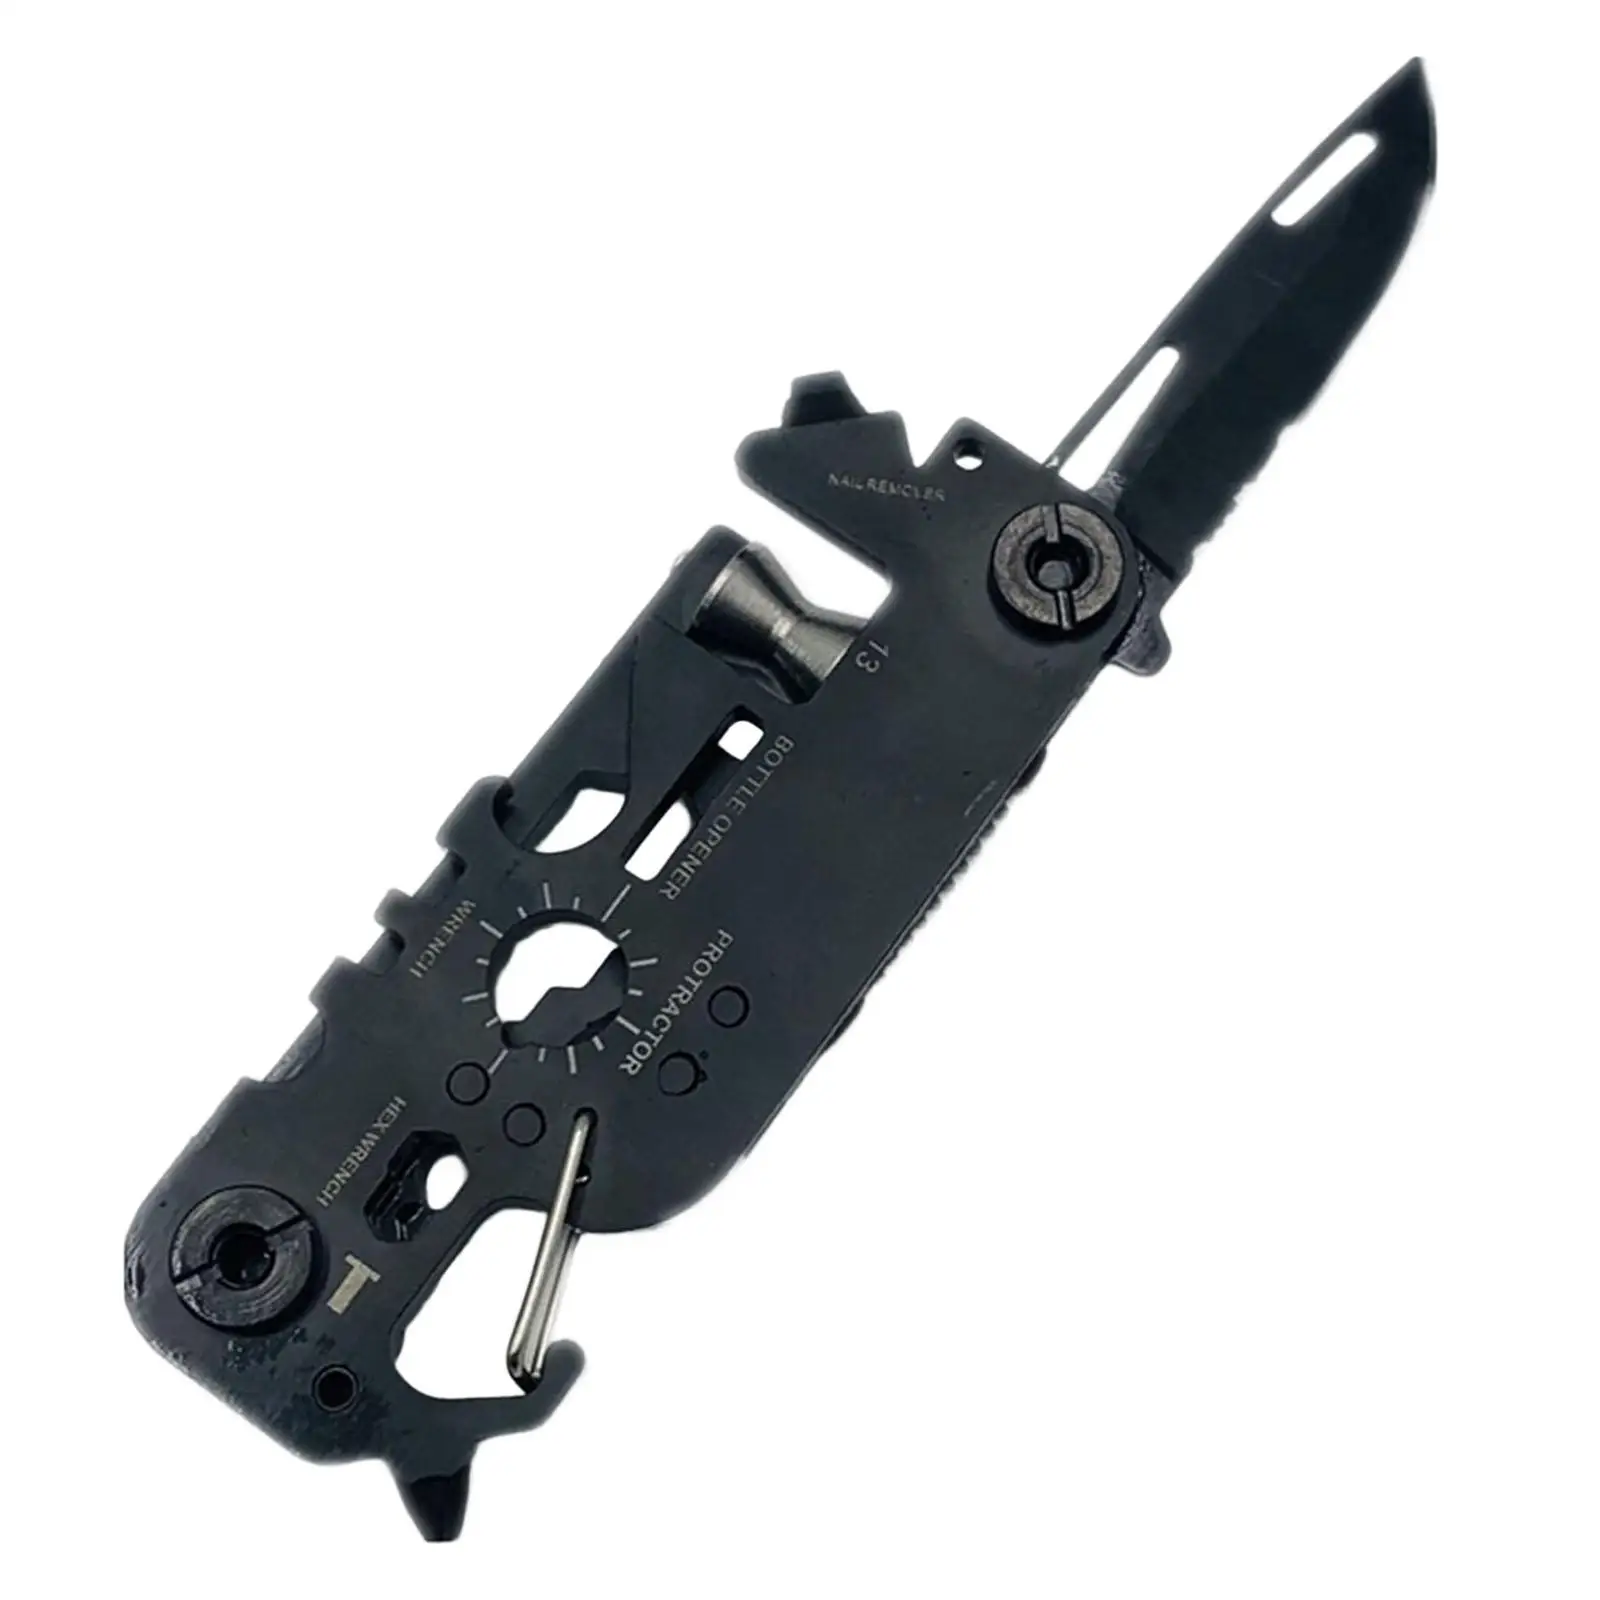 Multitool Combination Tool 30 in 1 Plier Kit Folding Pocket Knife for Hiking